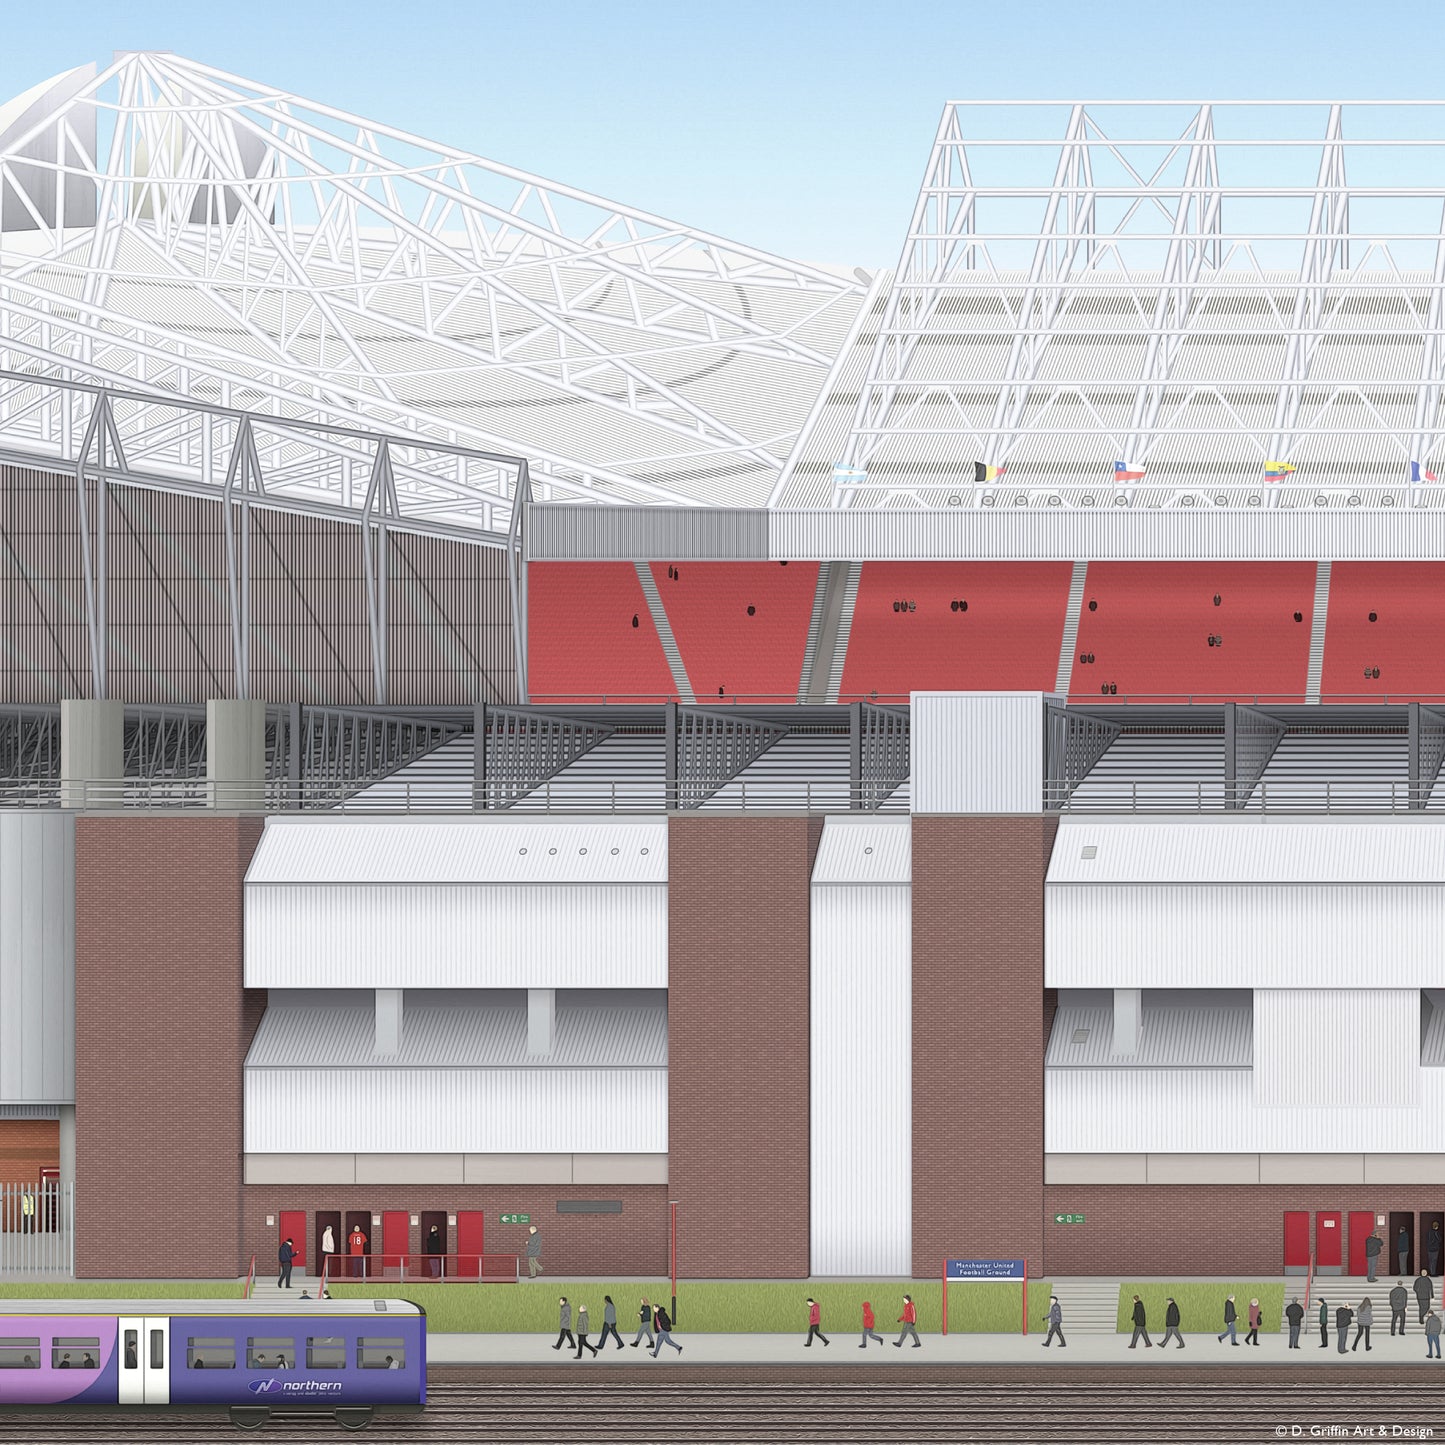 Manchester United – Old Trafford Panoramic Illustration